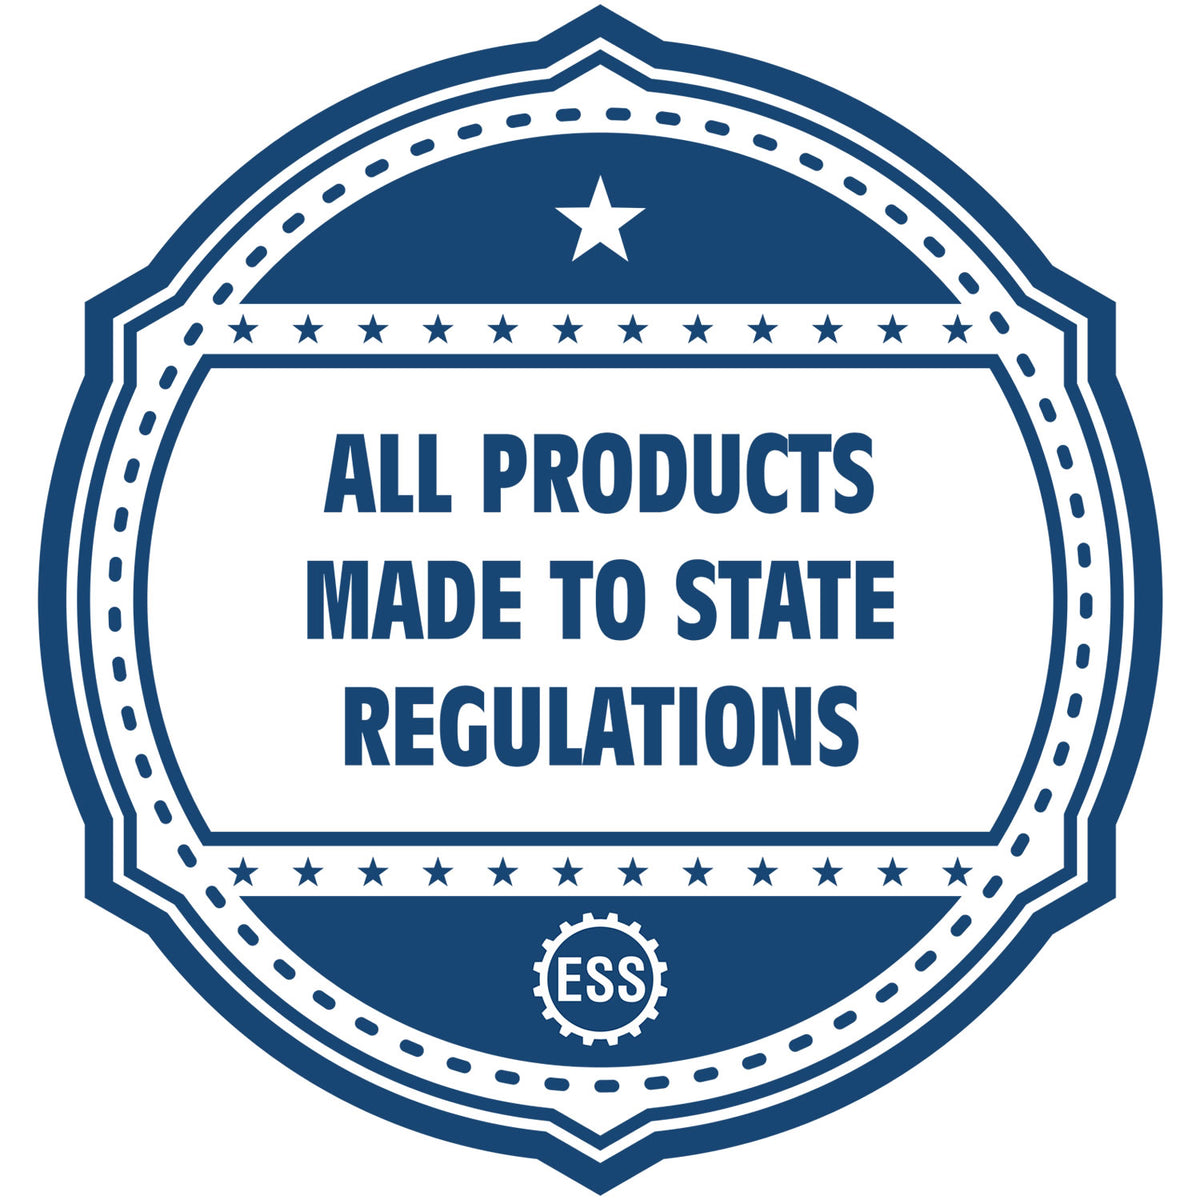 An icon or badge element for the State of Missouri Soft Land Surveyor Embossing Seal showing that this product is made in compliance with state regulations.